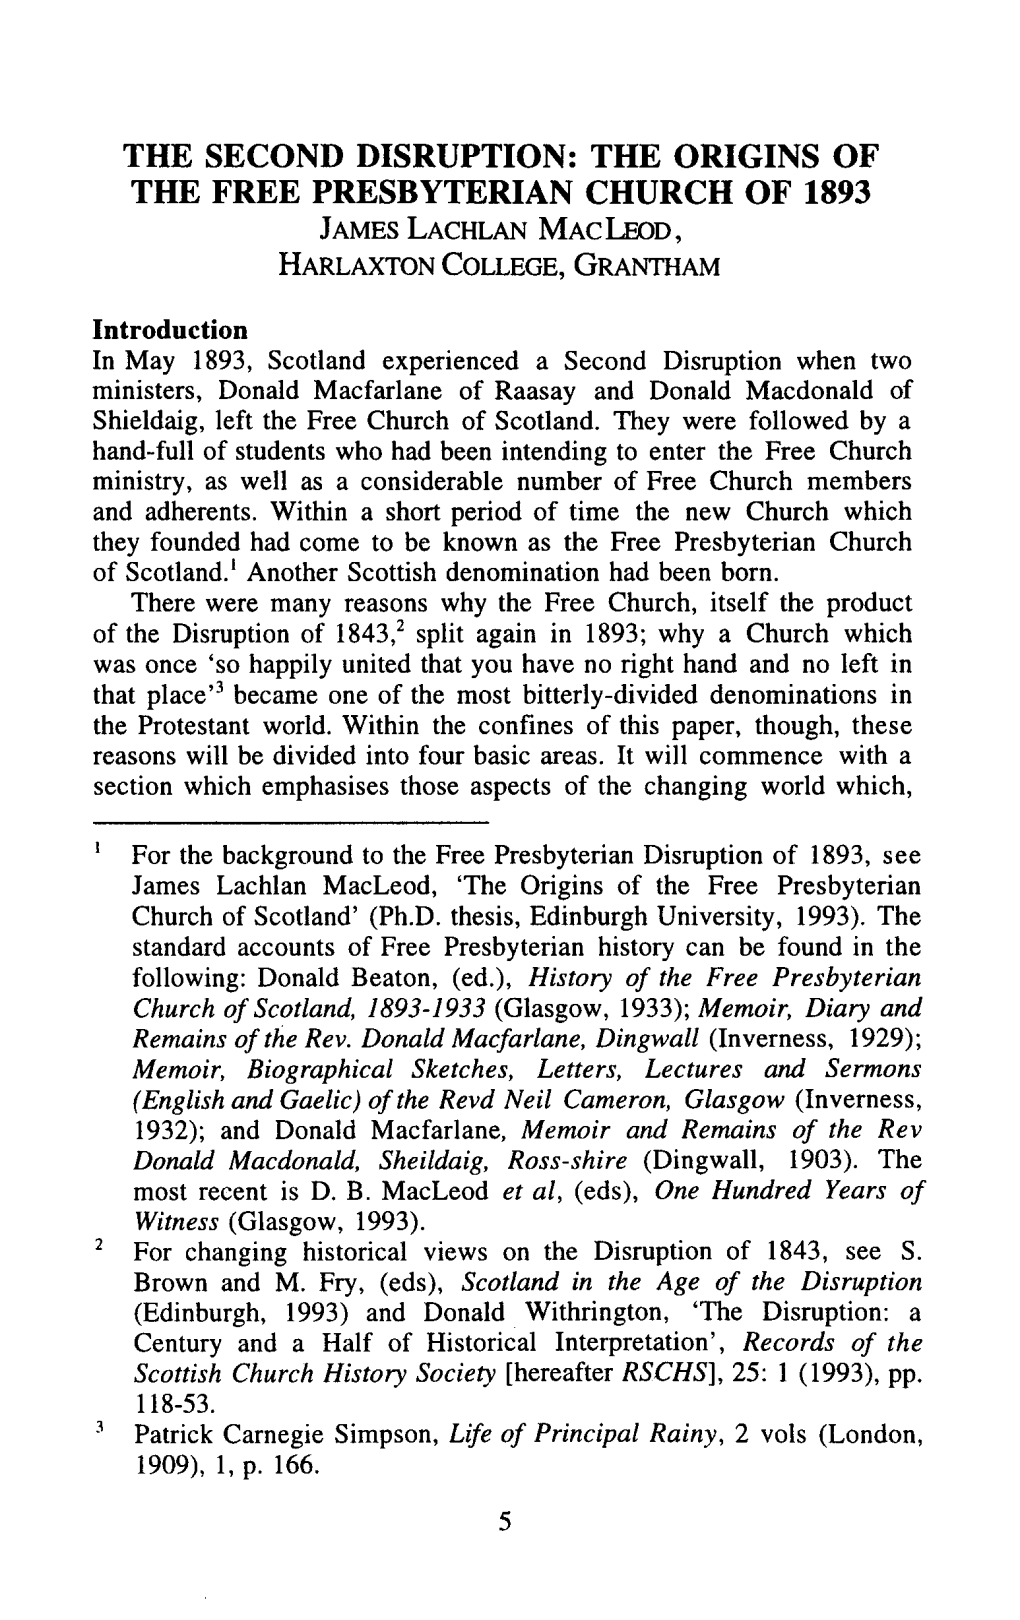 James Lachlan Macleod, "The Second Disruption: the Origins of the Free Presbyterian Church of 1893," Scottish Bulletin